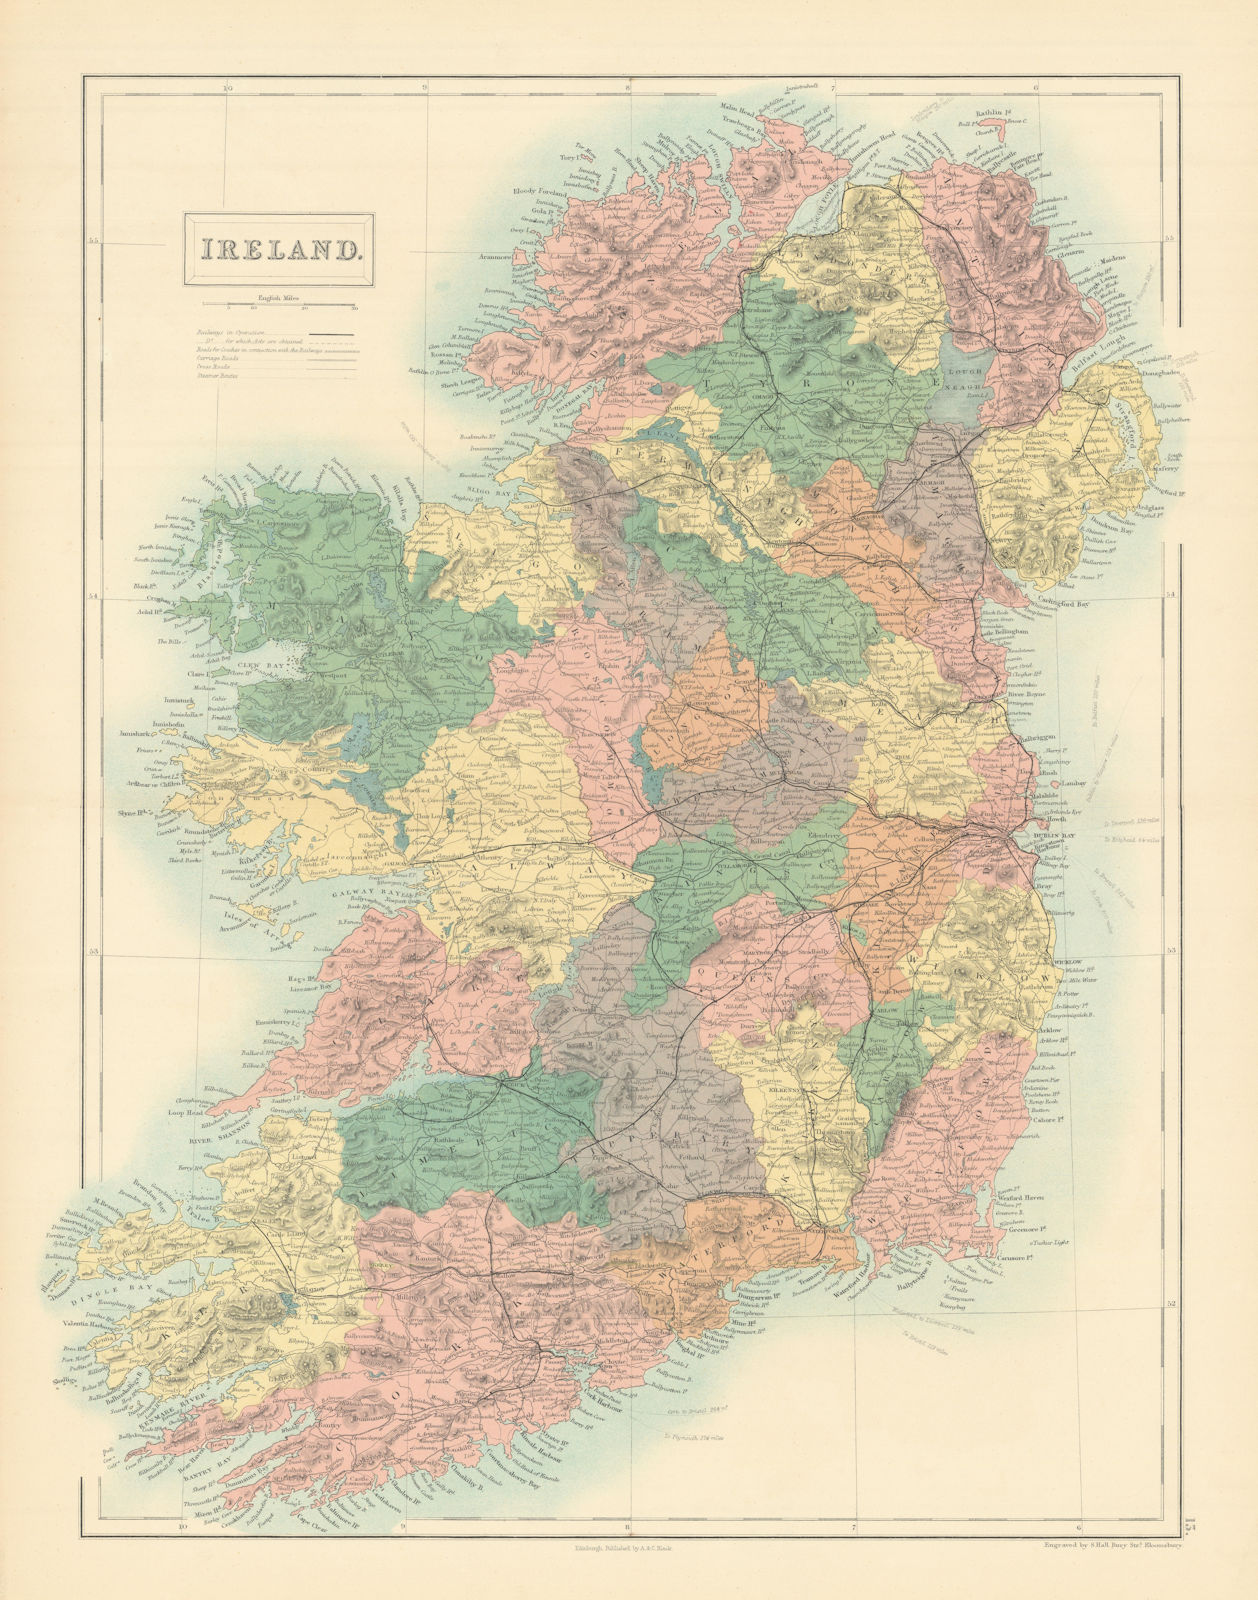 Associate Product Ireland showing counties & railways by SIDNEY HALL 1862 old antique map chart